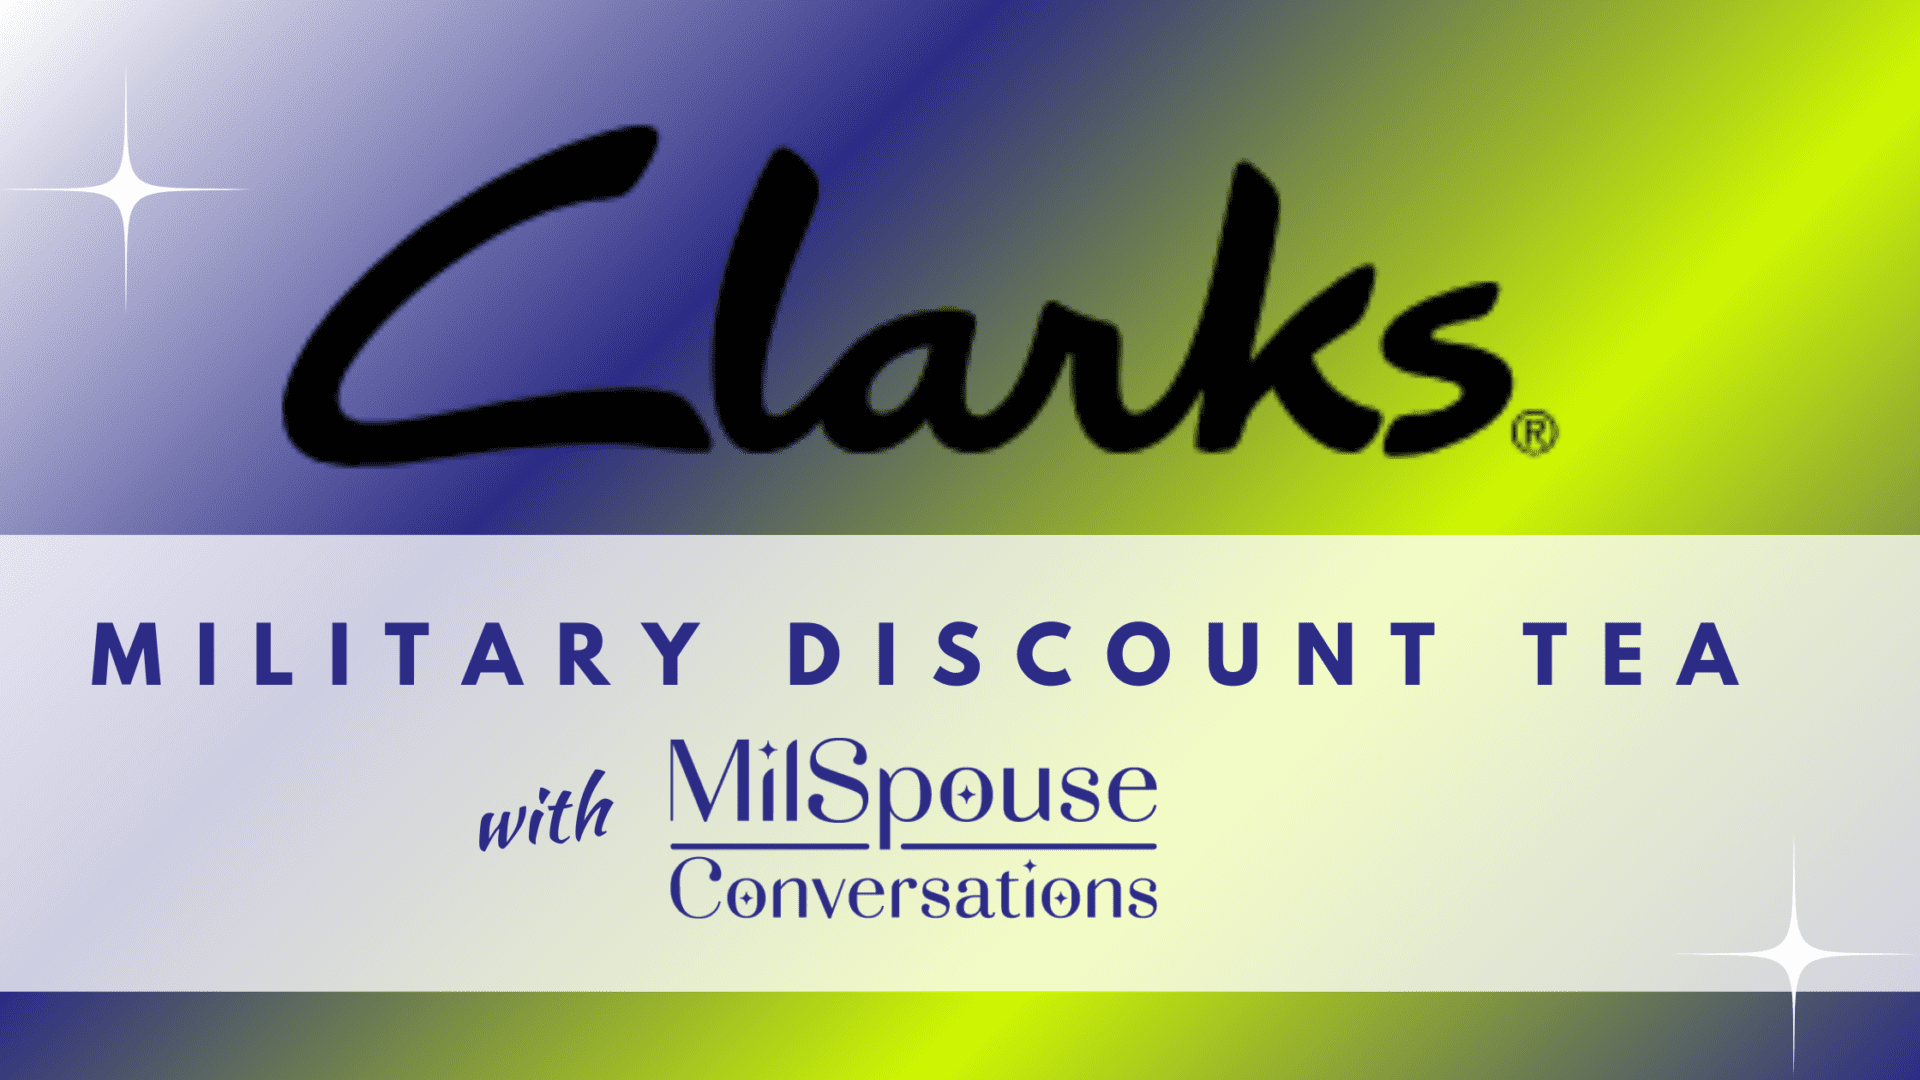 Clarks Military Discount